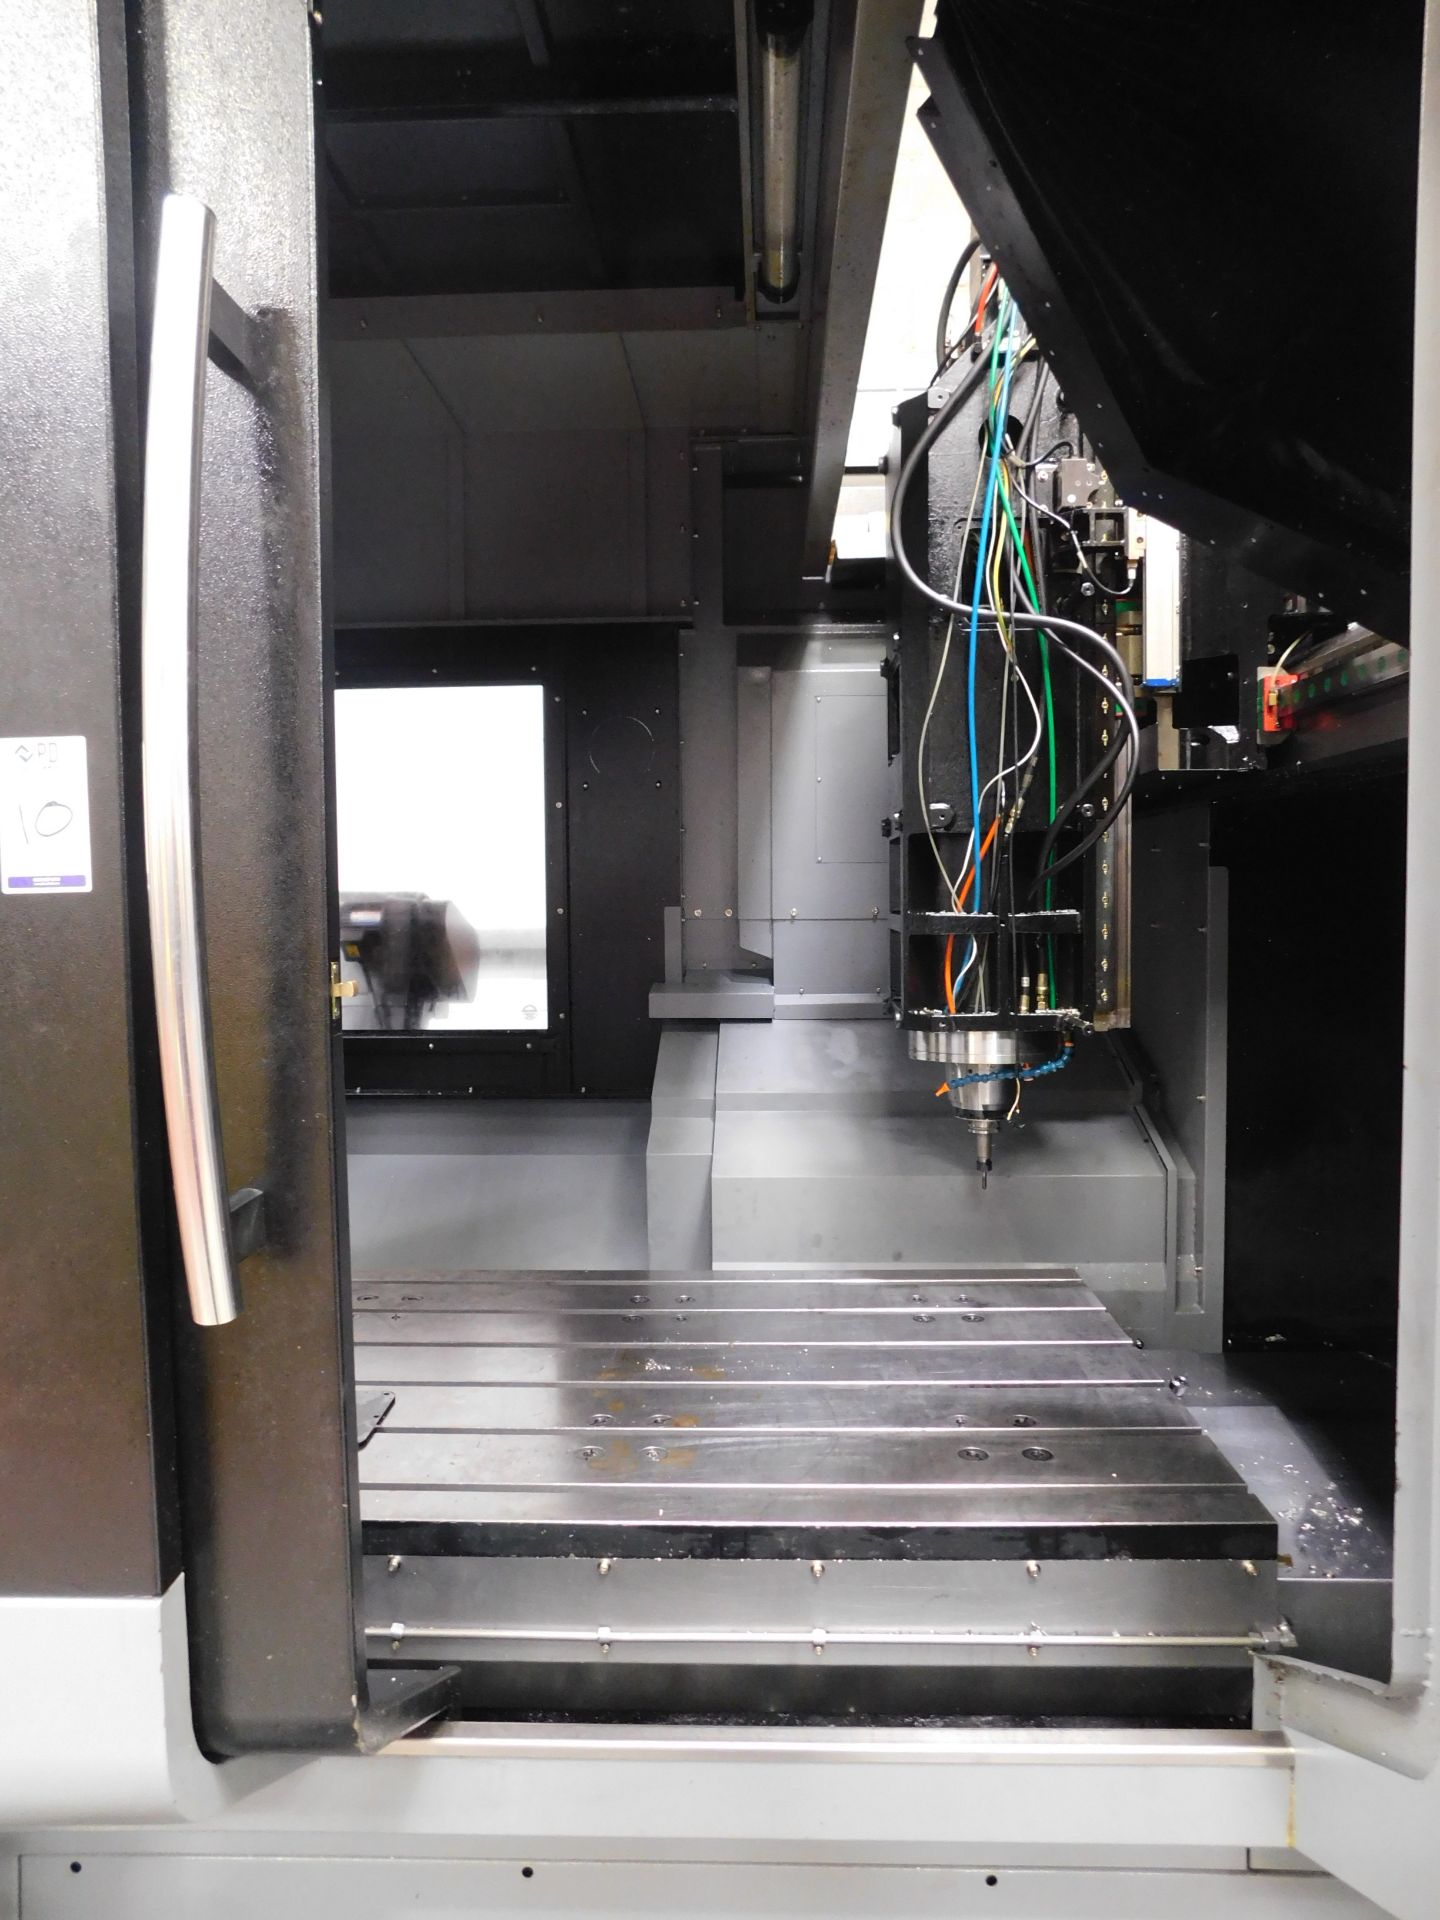 Hurco BX50i CNC Machining Centre, Serial Number SB573-1E101C7AFJCH (Manufacturer Advises Requires - Image 8 of 33